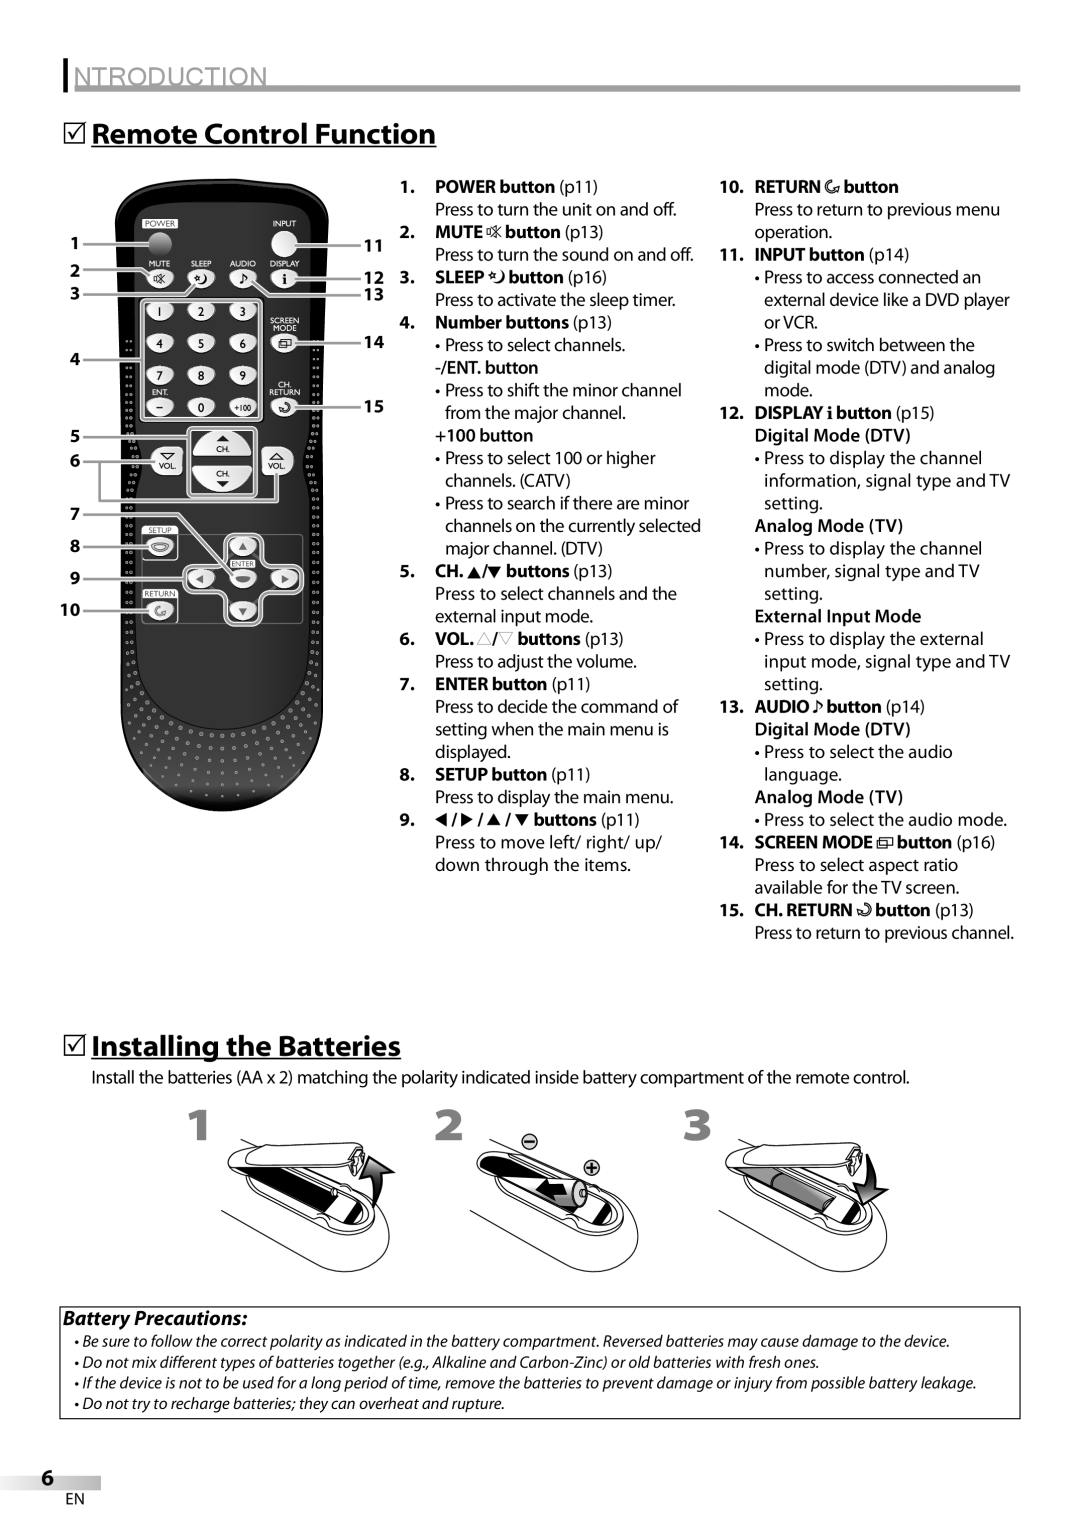 FUNAI LC200EM8G 5Remote Control Function, 5Installing the Batteries, Introduction, Battery Precautions, POWER button p11 